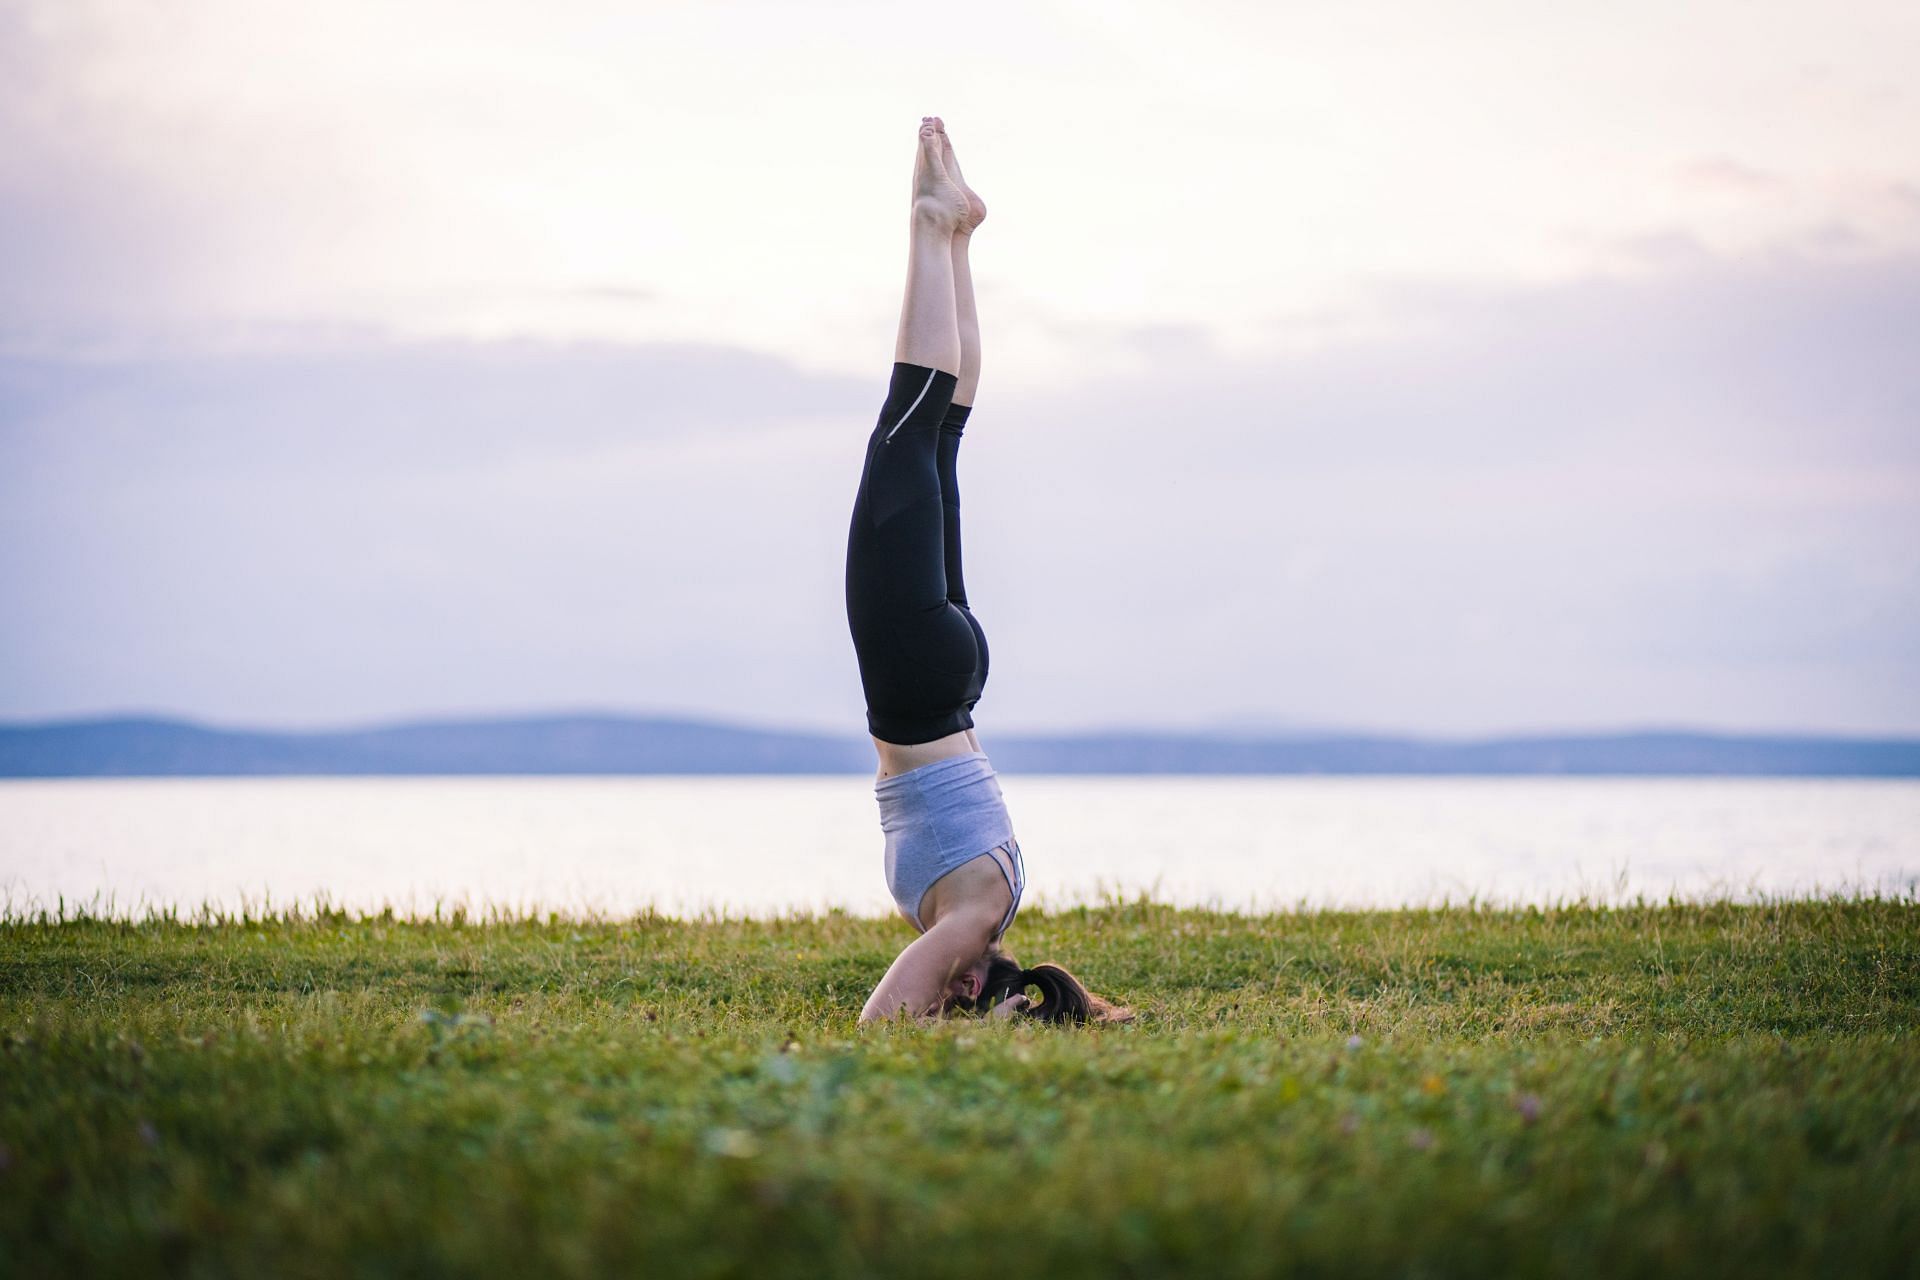 The headstand is a classic yoga pose, but how can it benefit you? Read on to find out.